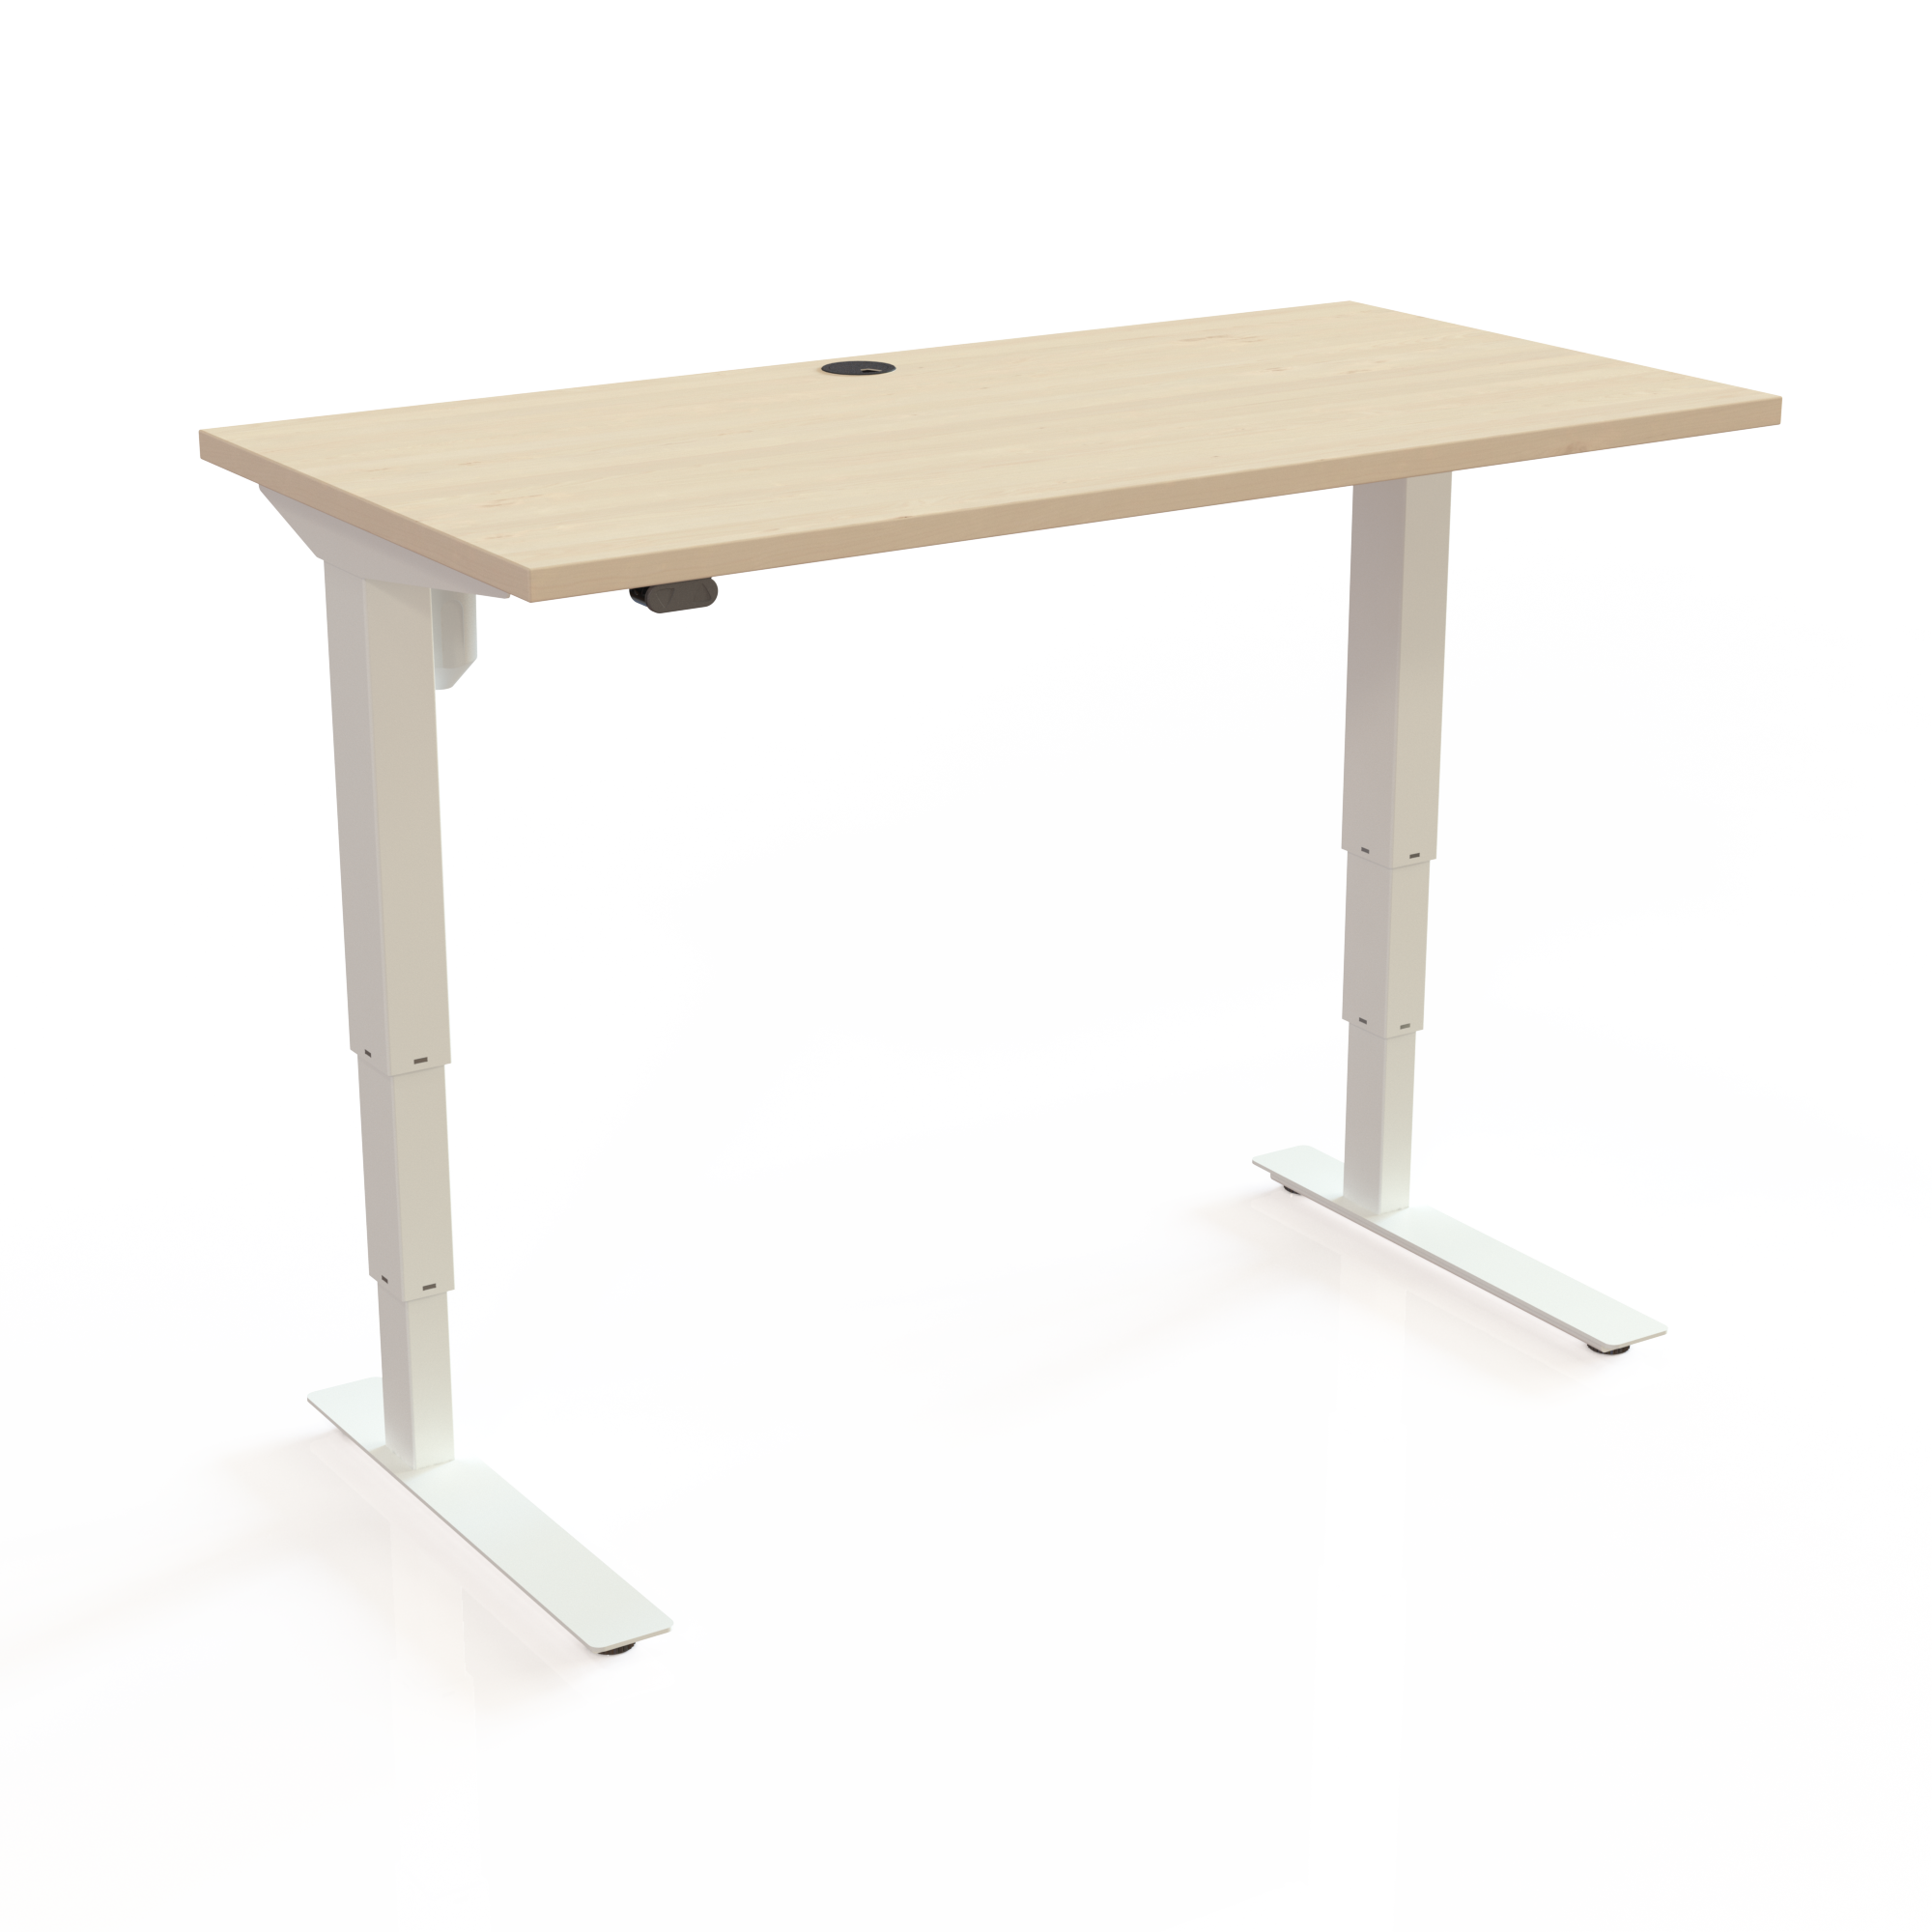 Electric Adjustable Desk | 120x60 cm | Maple with white frame